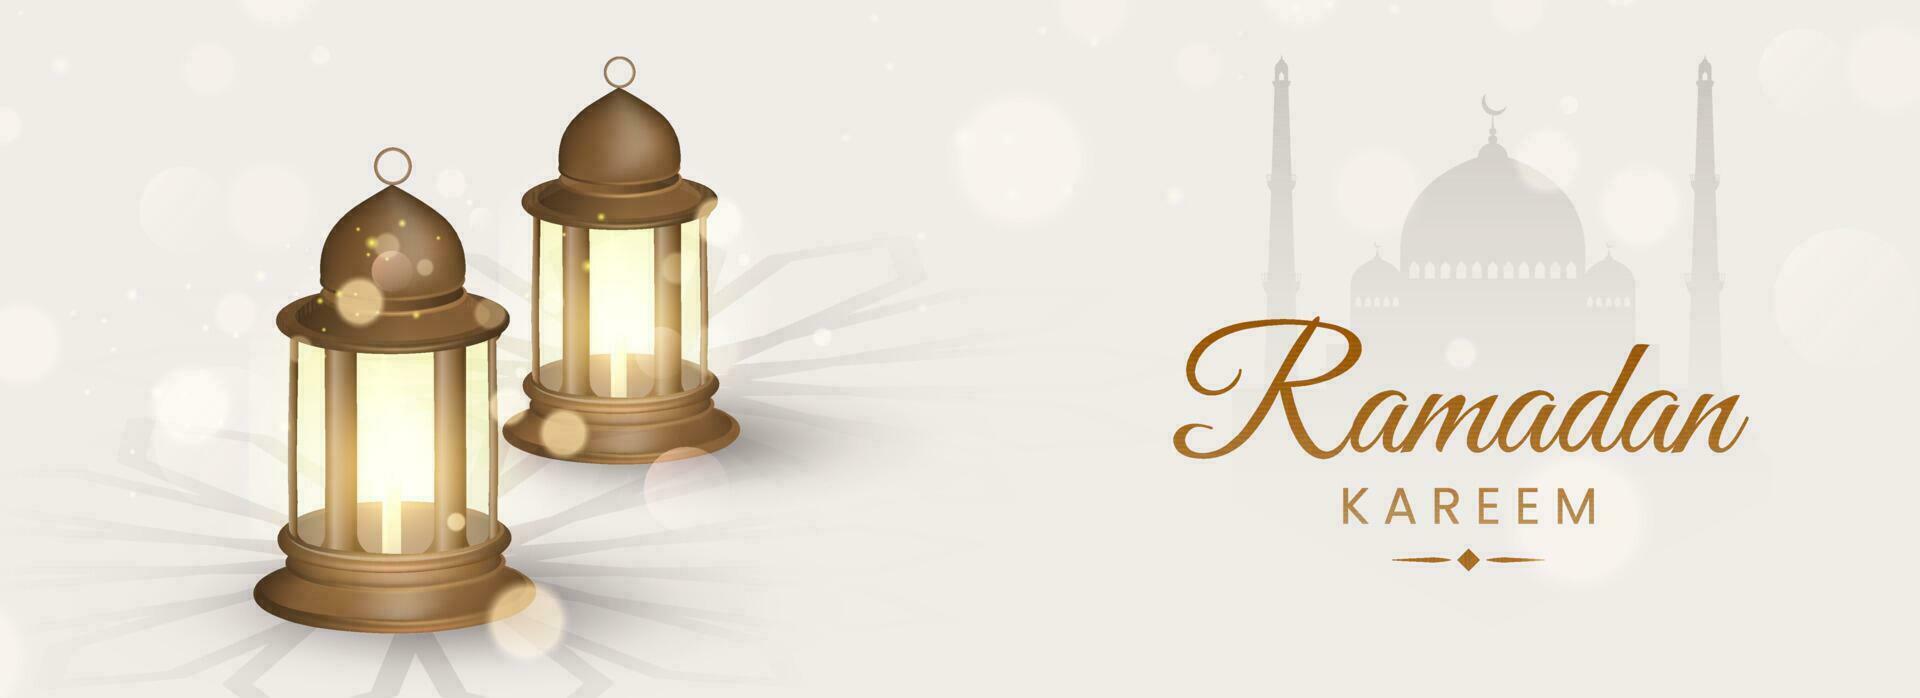 Ramadan Kareem Concept With 3D Illuminated Lanterns On White Silhouette Mosque Background. vector